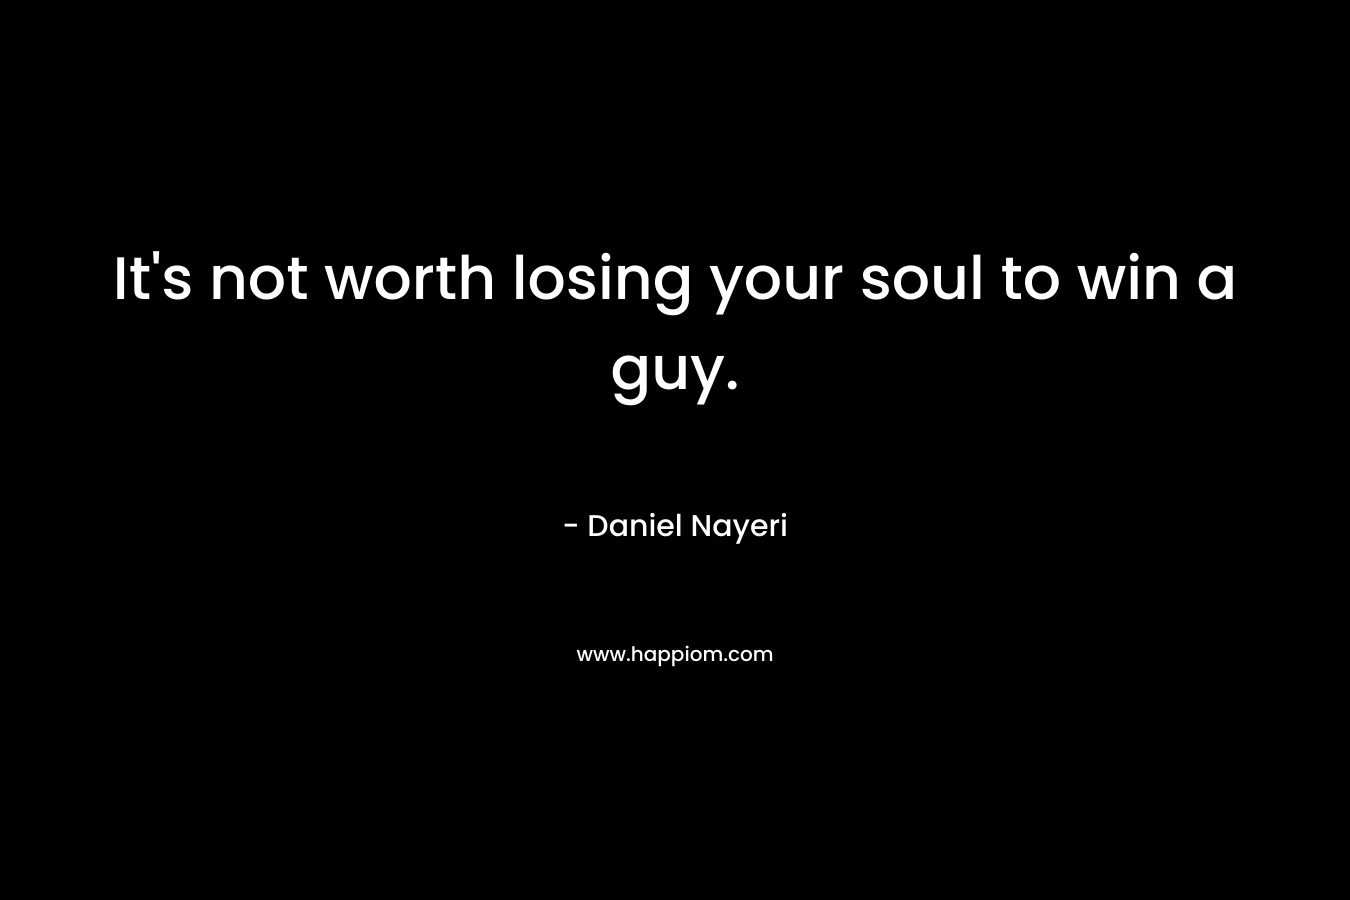 It's not worth losing your soul to win a guy.